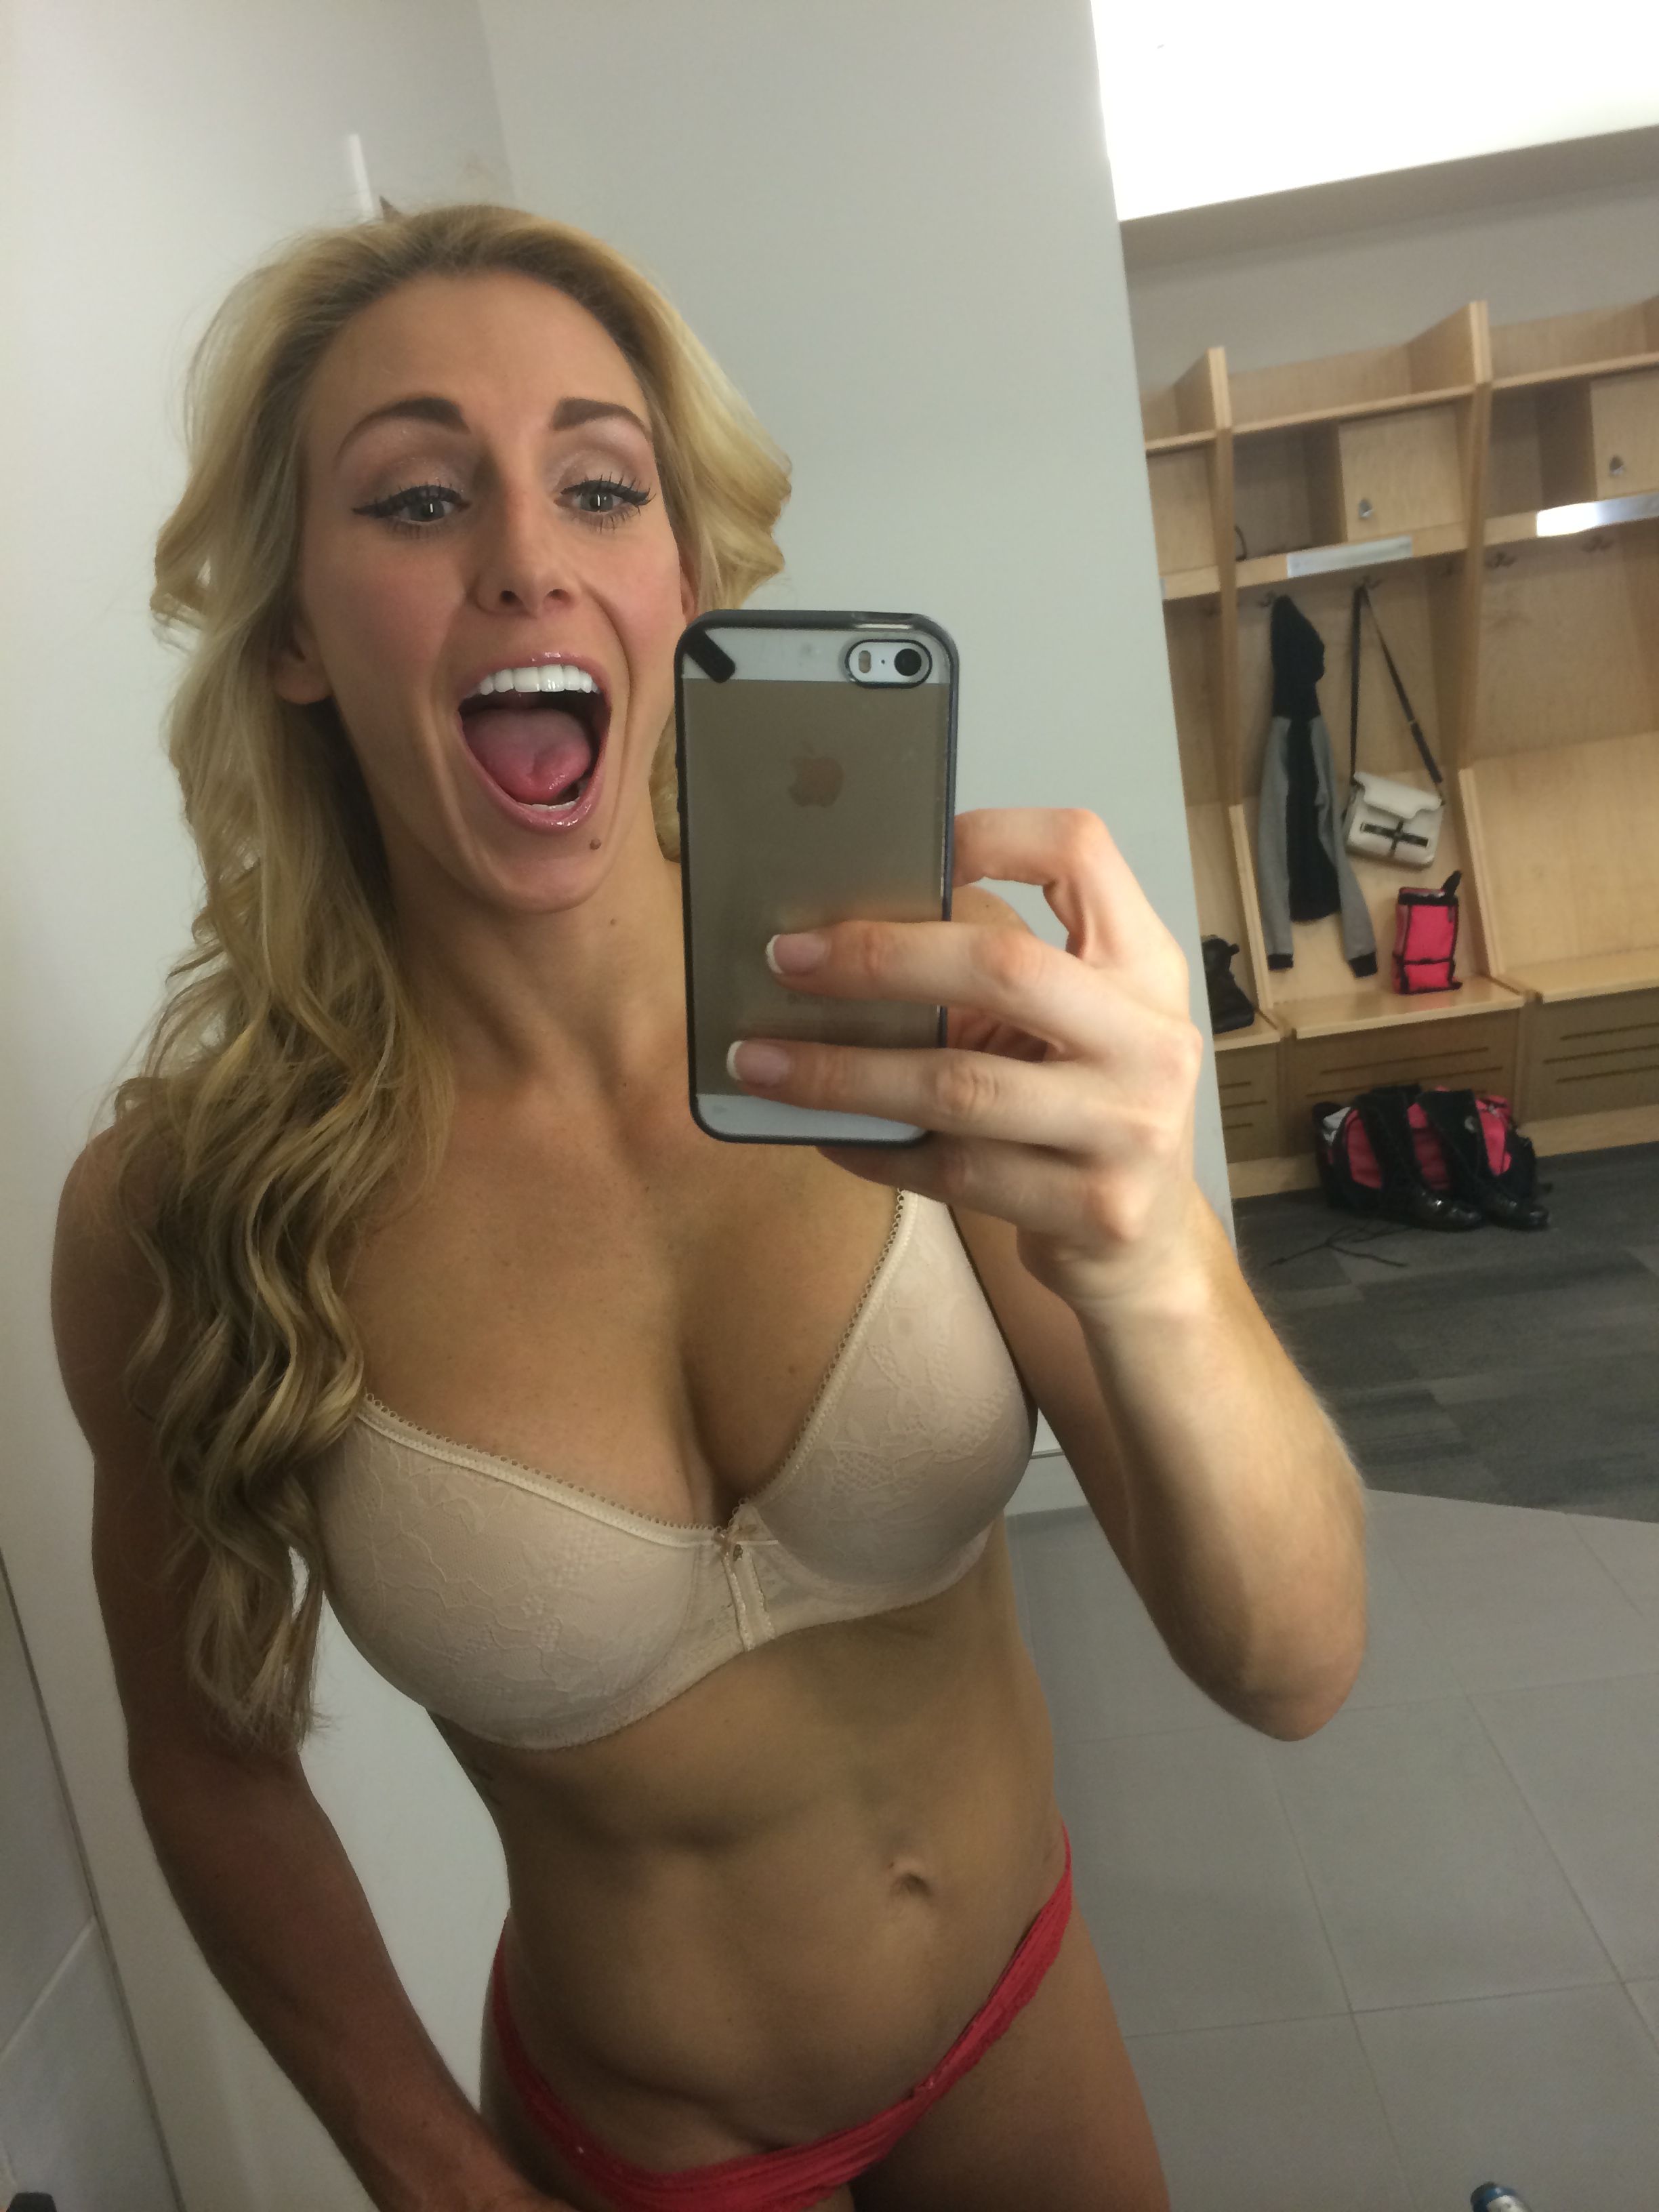 Charlotte Flair Nudes Leaked - So You Can See Her Boobs (17 PICS) .